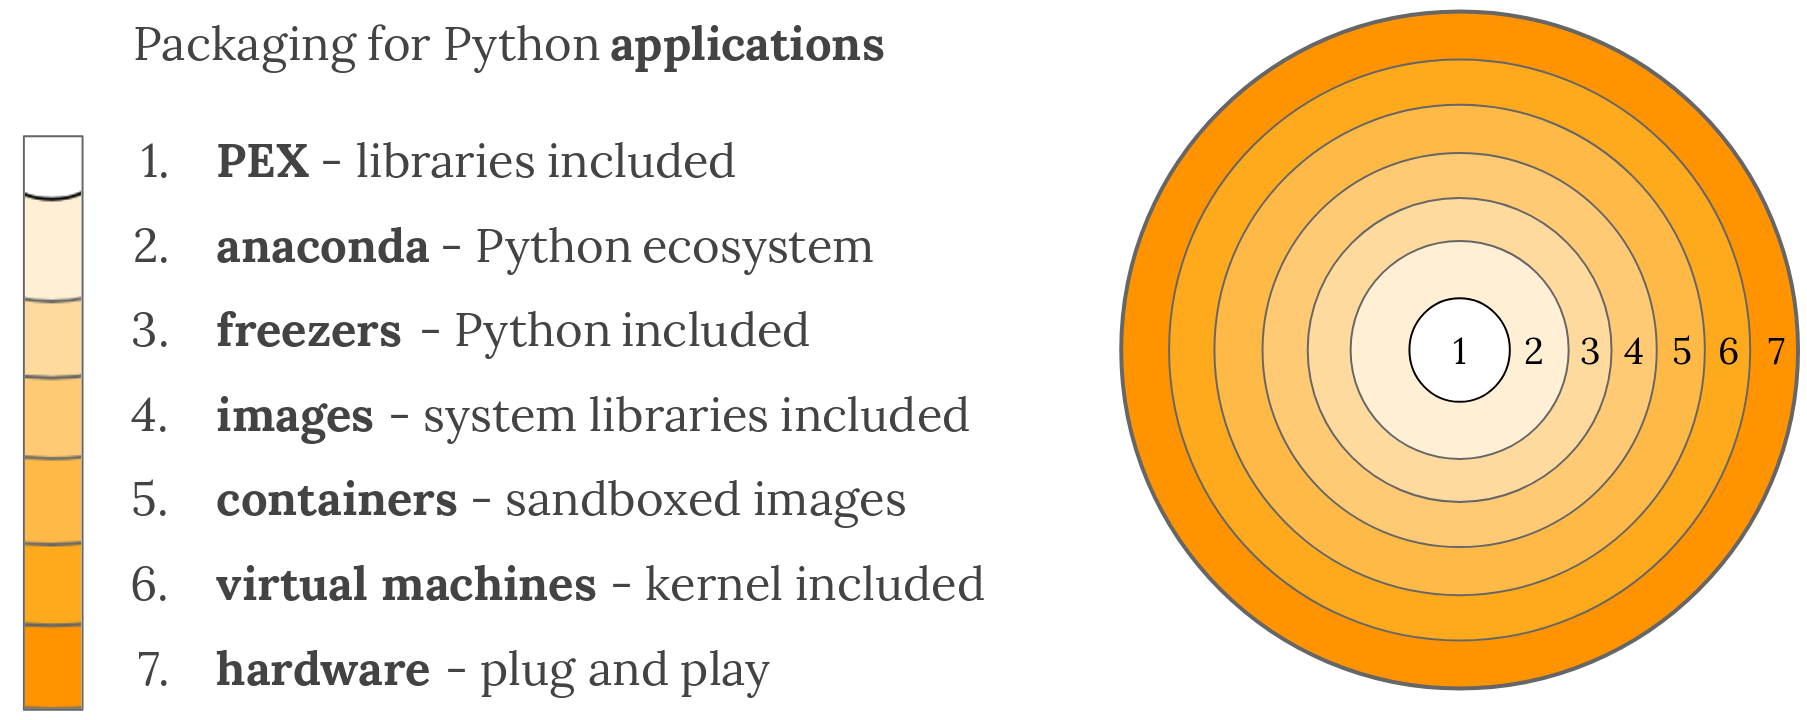 A summary of technologies used to package Python applications.